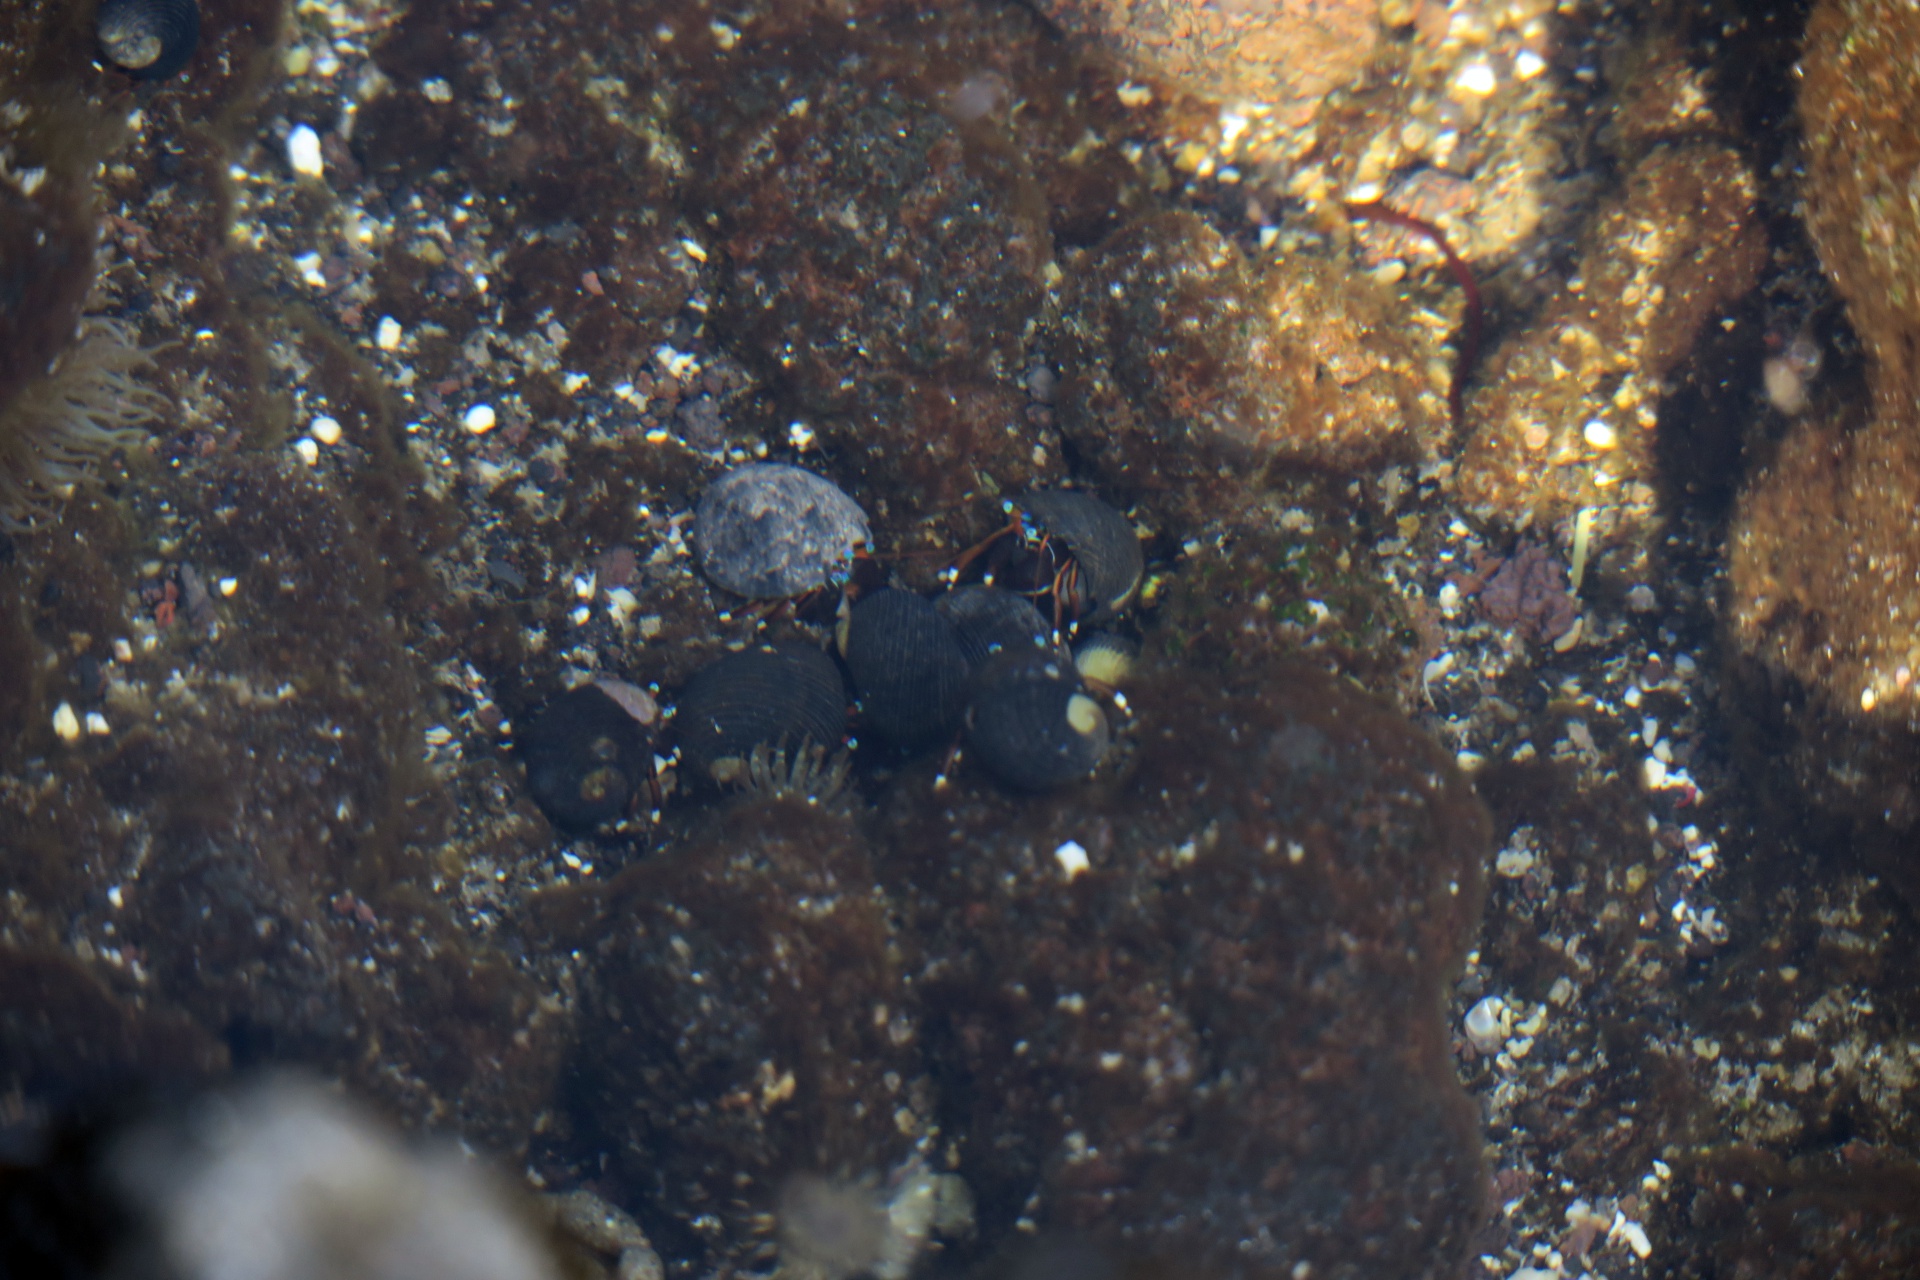 Hermit crabs in a tide pool!